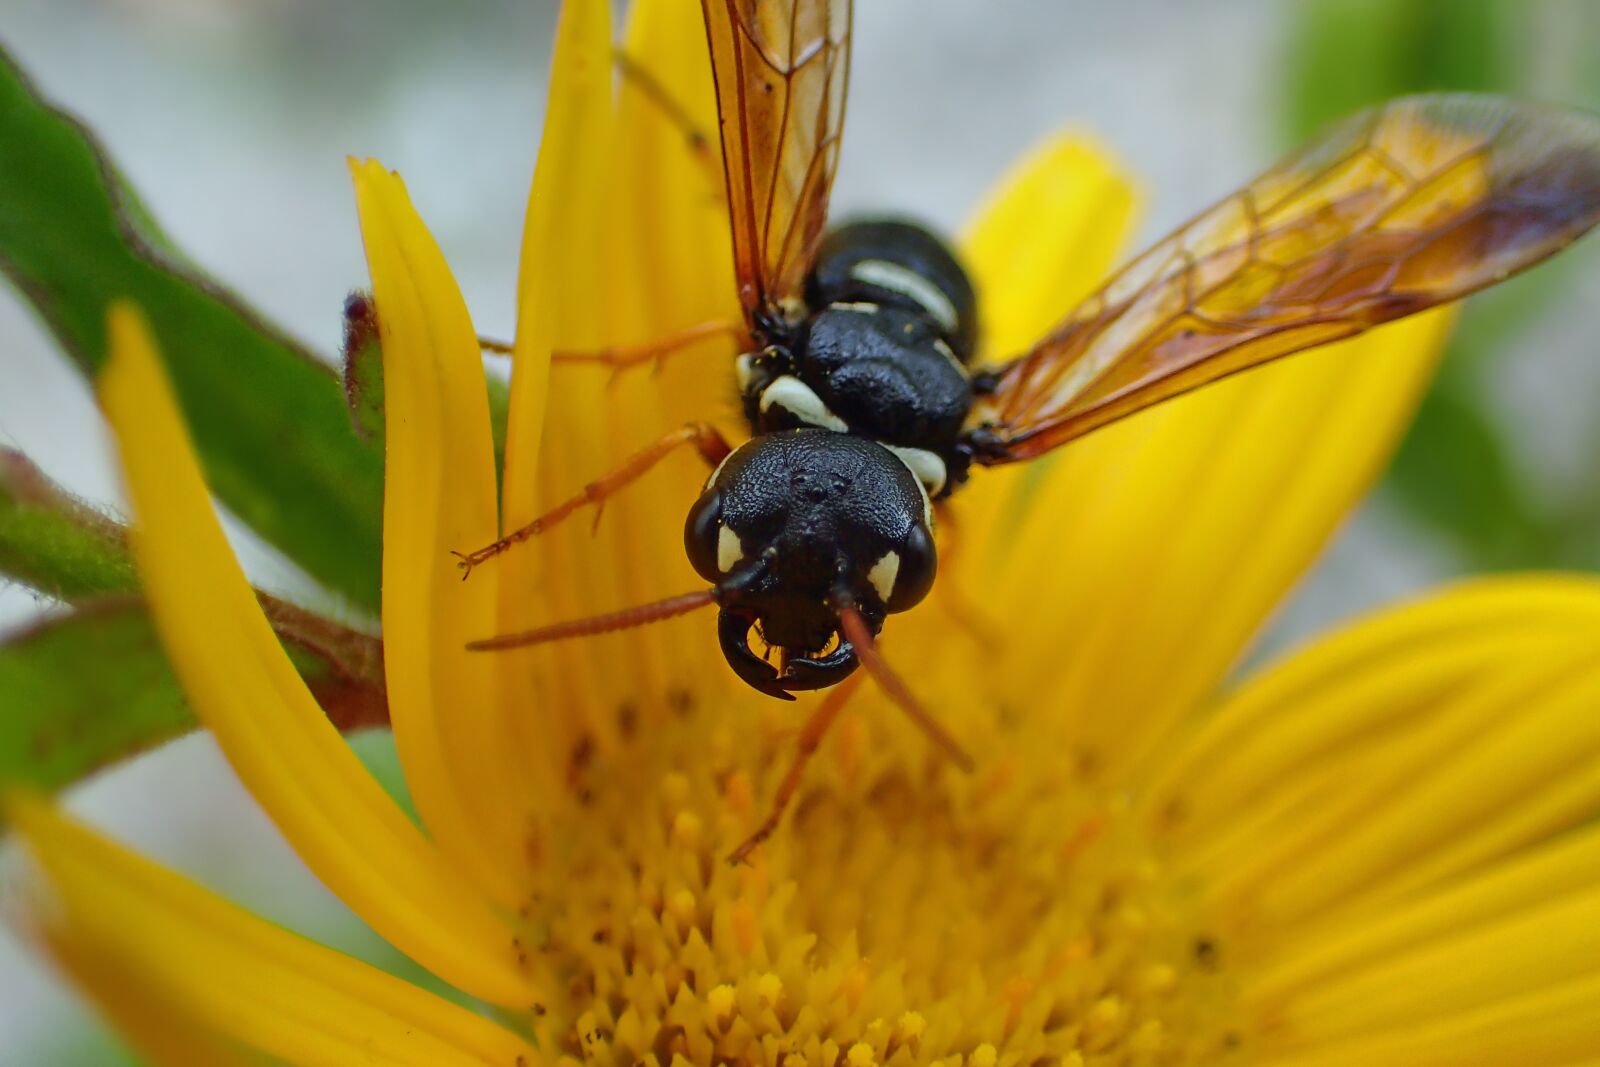 Olympus TG-3 sample photo. Animal, insect, wasp photography